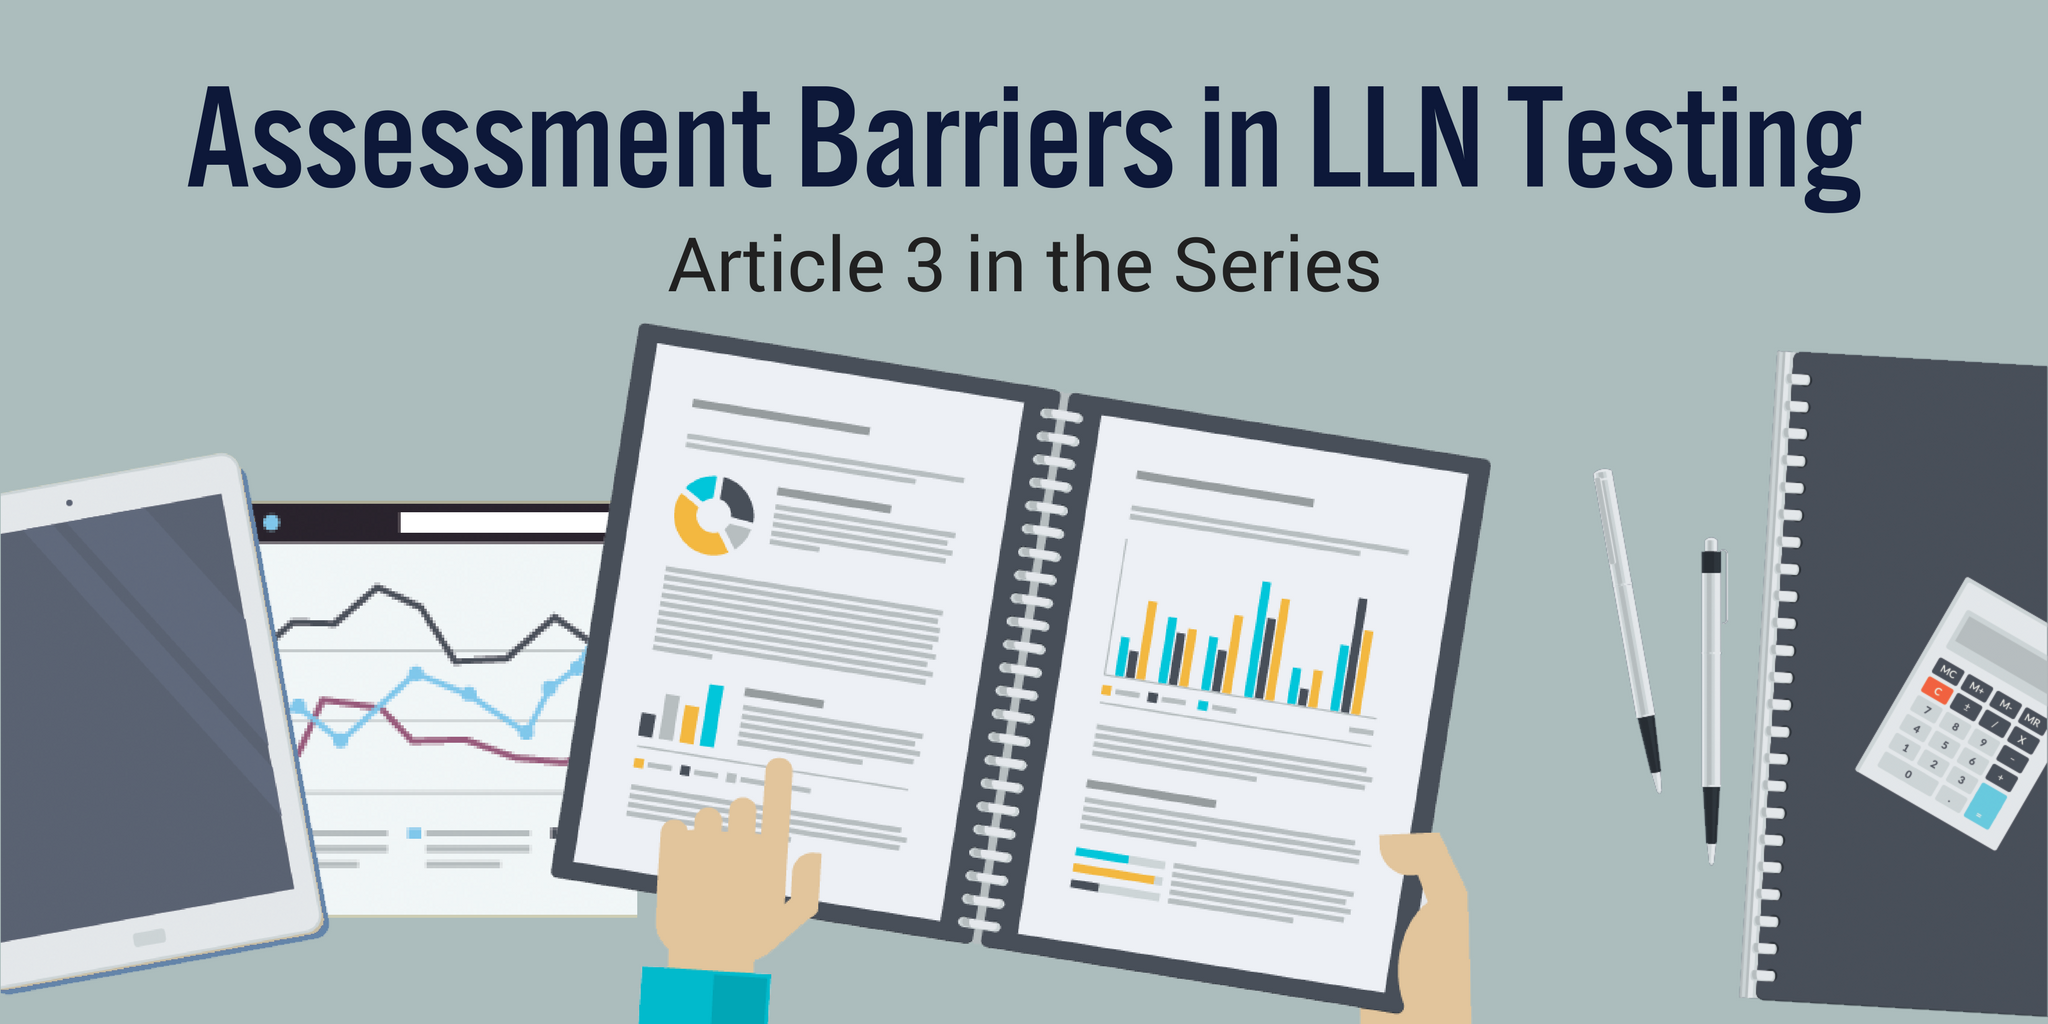 Assessment Barriers in LLN Testing